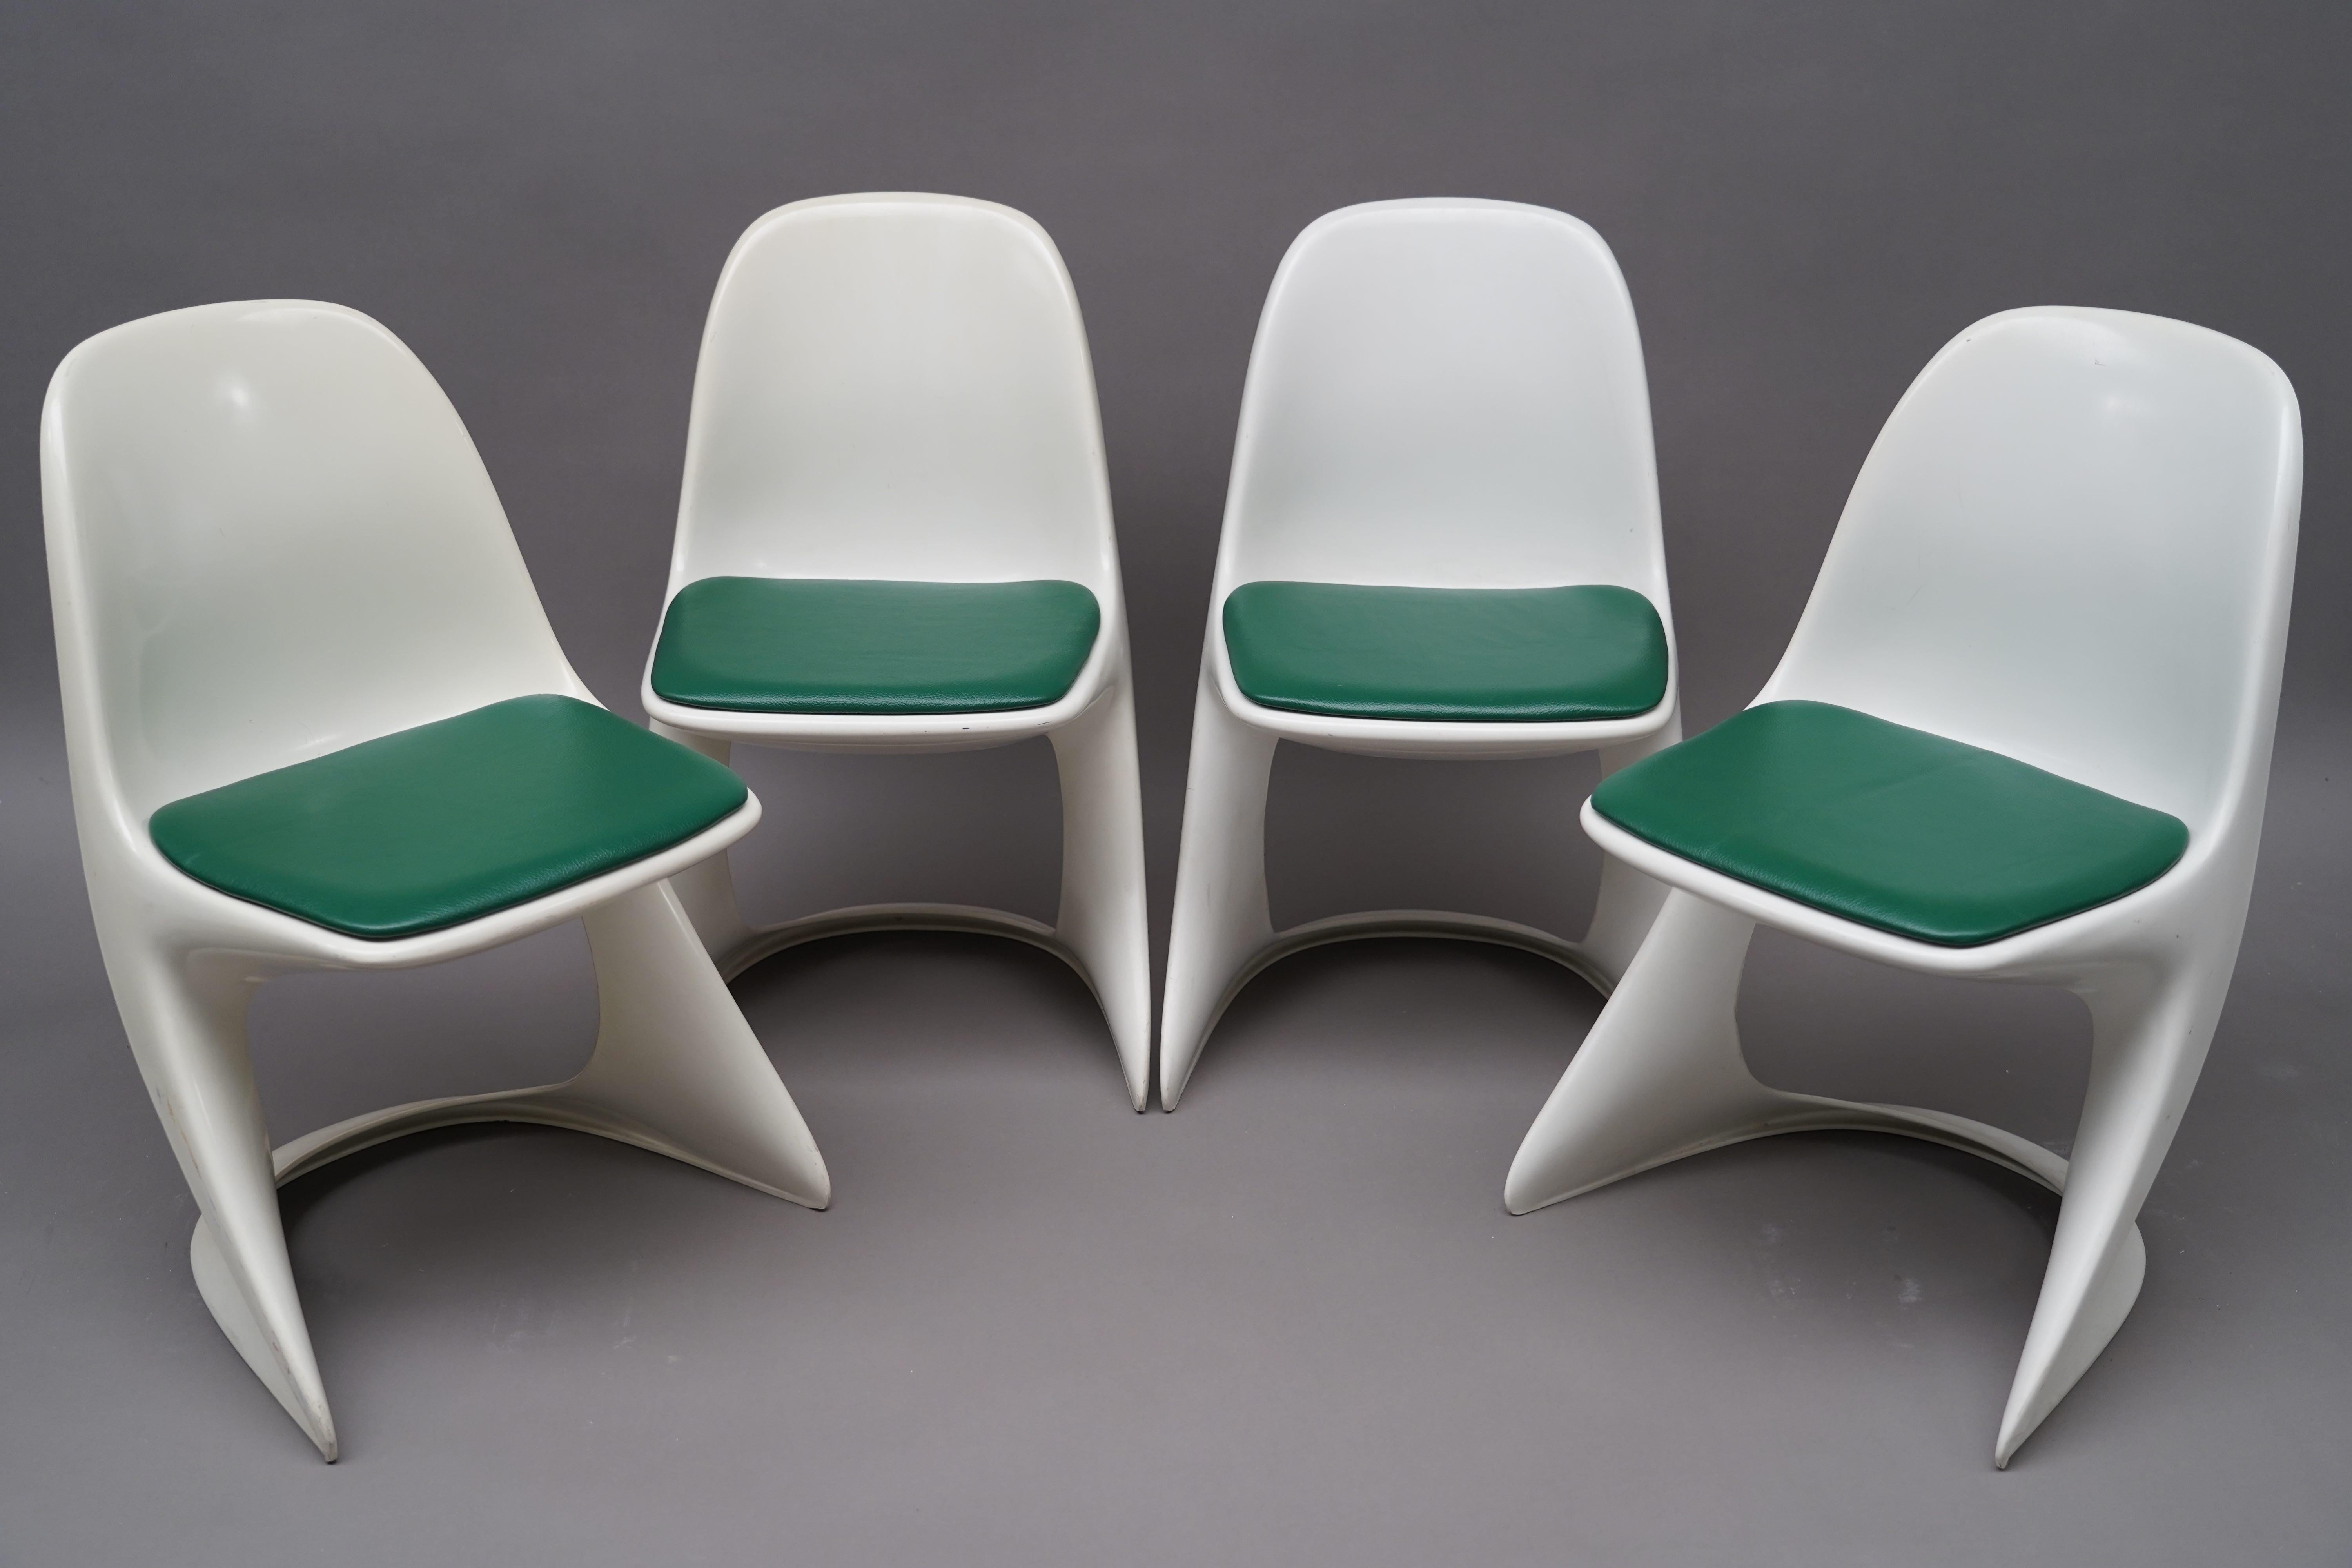 Set of 10 Casala chairs

Signed: Casala model 2004/2005
Germany

Resign, skai

Height: 80 cm; Width: 45cm; Depth: 43 cm

Rare set of 10 Casala chairs designed in the 1970s by Alexandre Begge during the Space age. In good condition with their